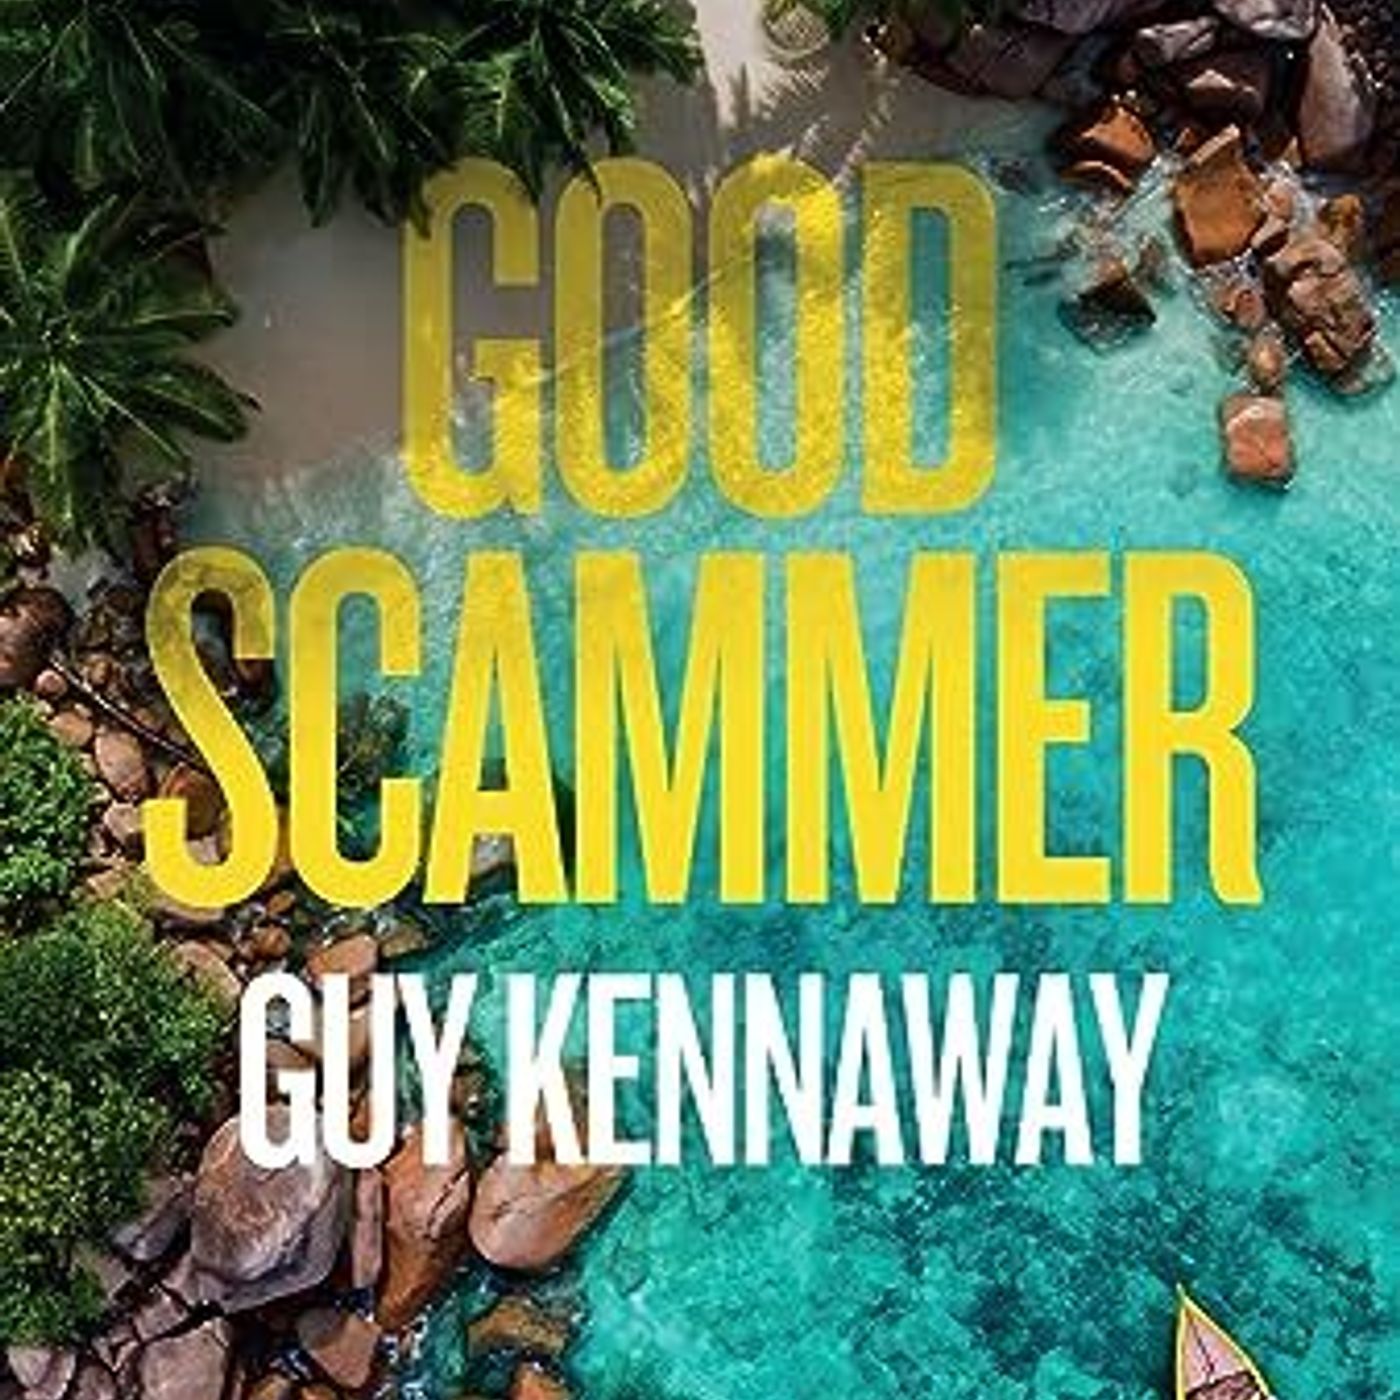 The Book Club: Good Scammer